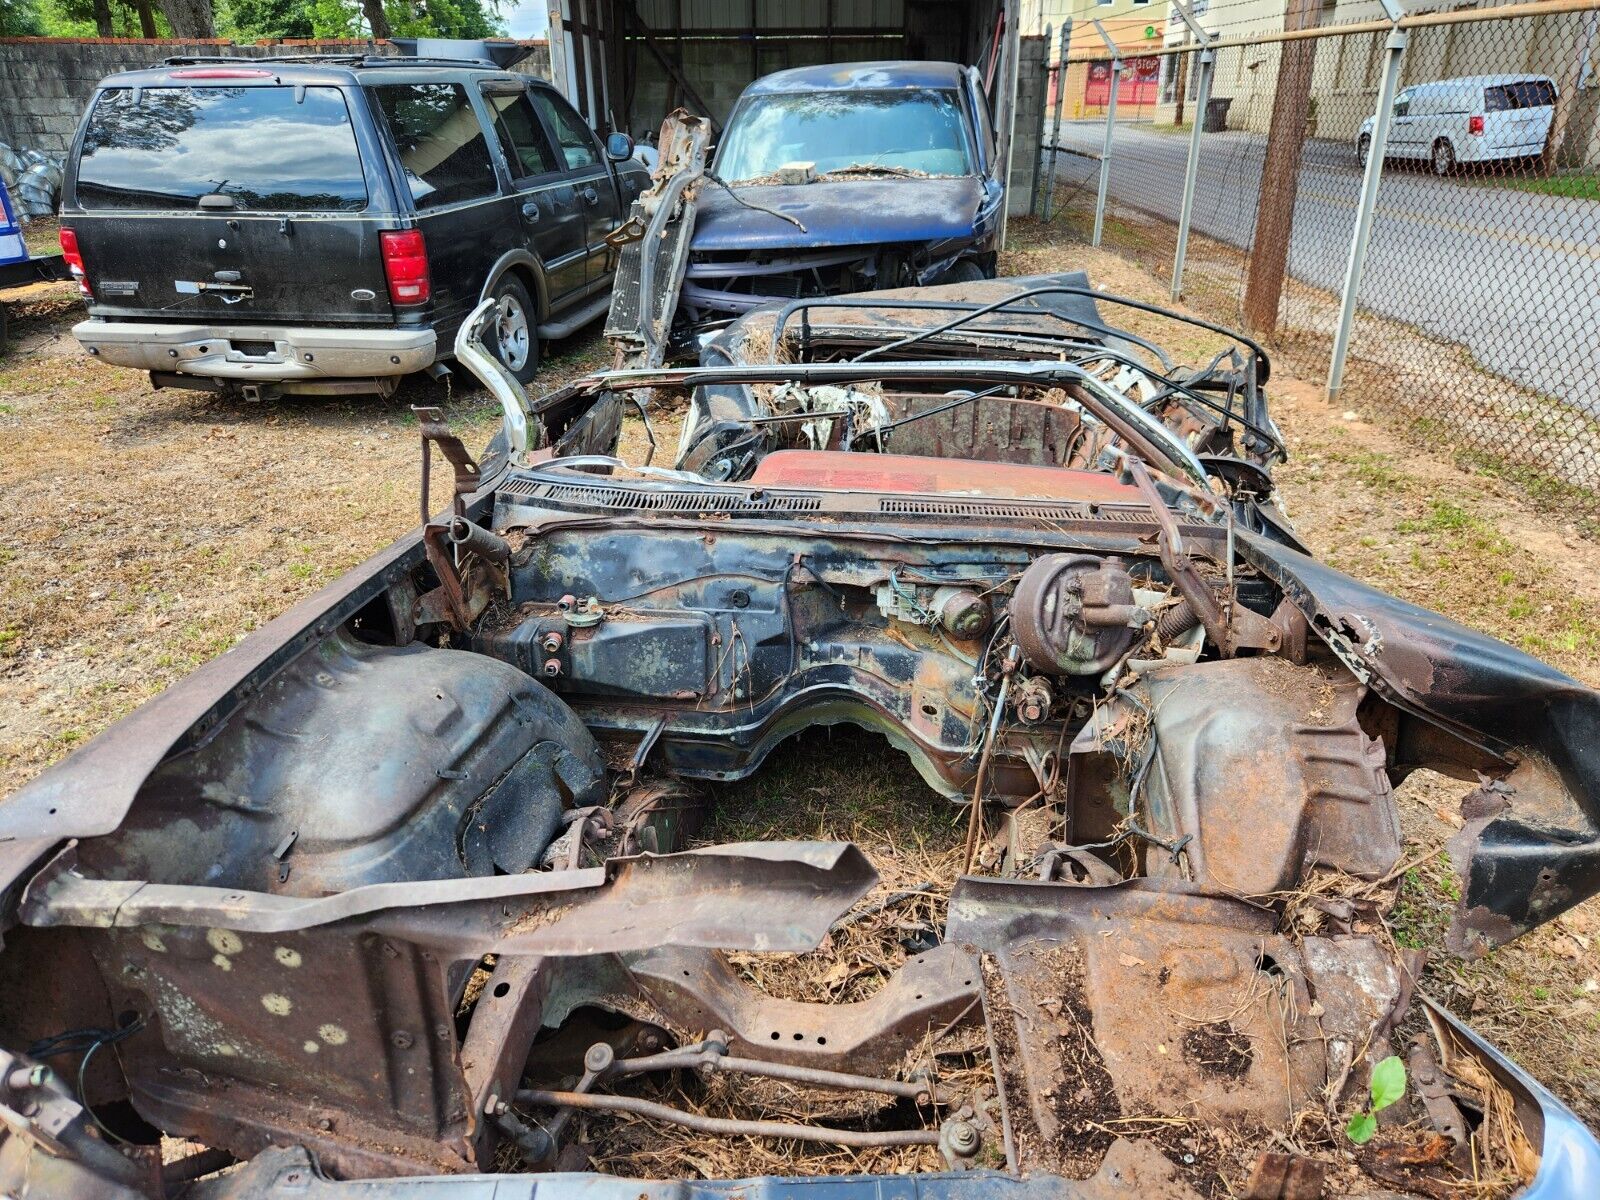 Is There Anything Left To Save Of This Chevy Impala?